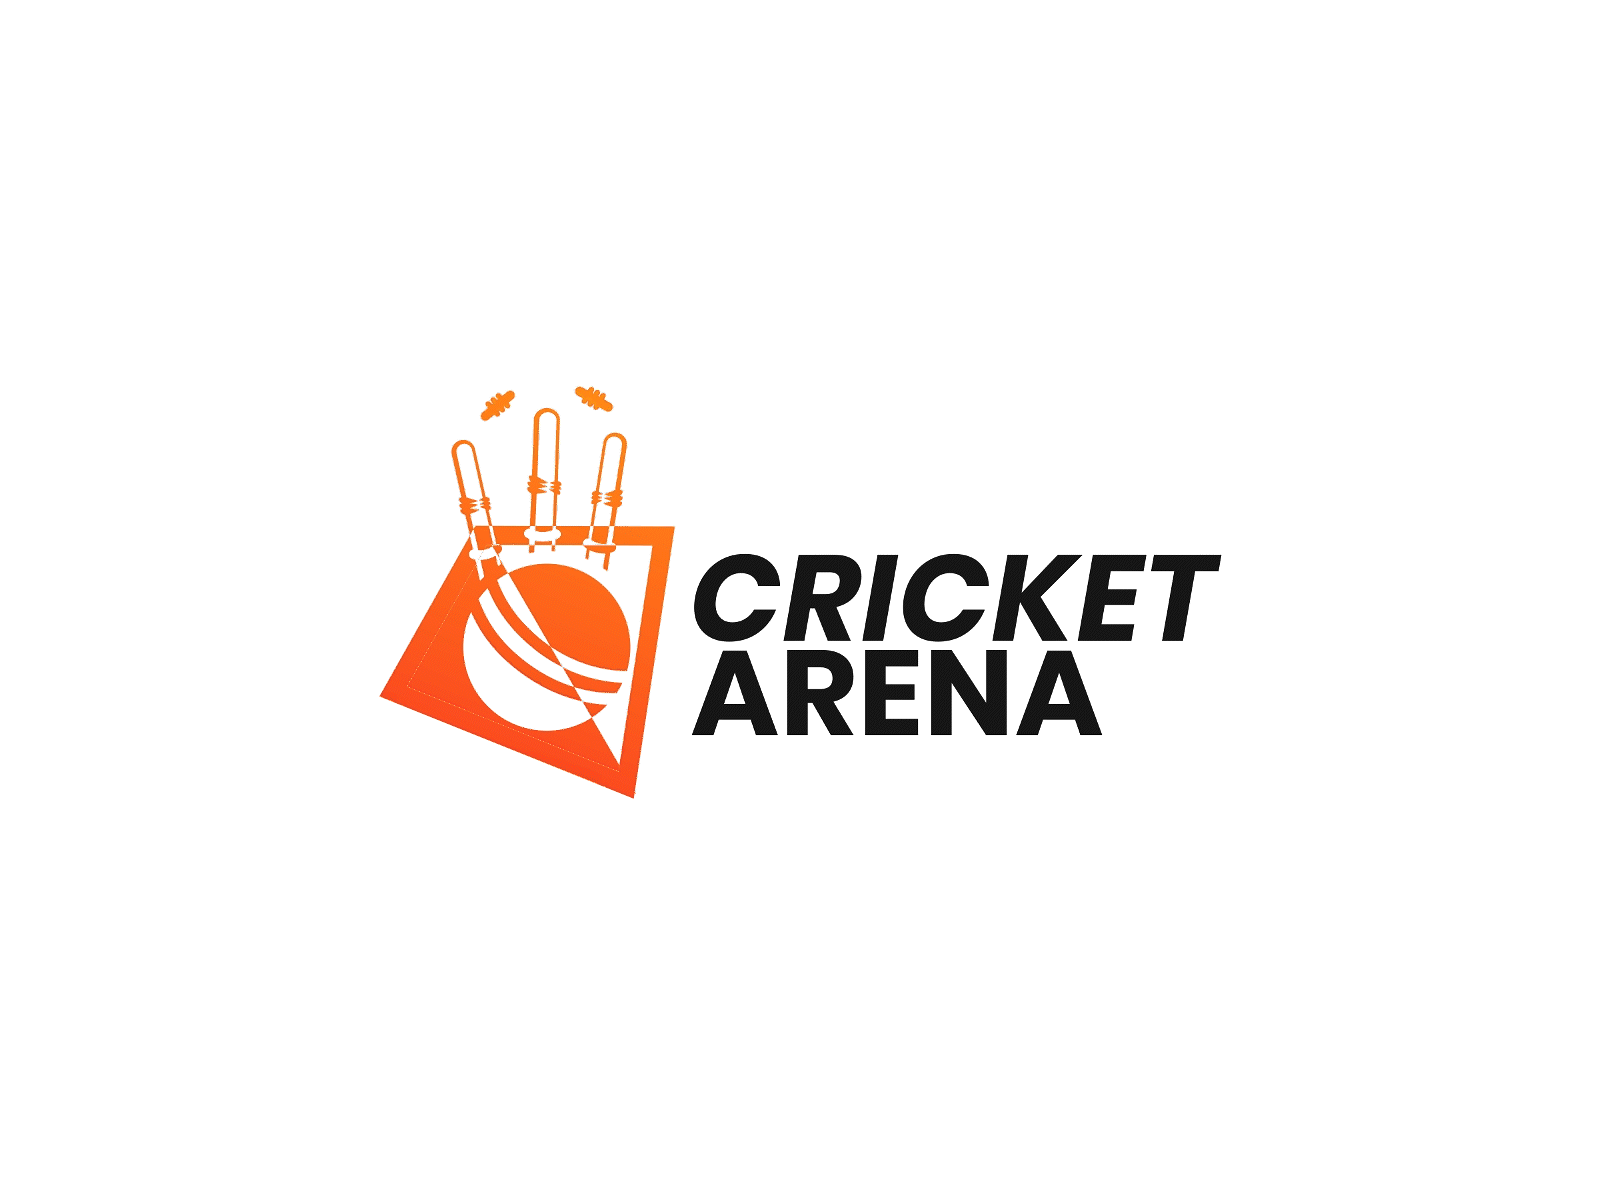 Cricket Arena Logo Animation by gerald griffith on Dribbble